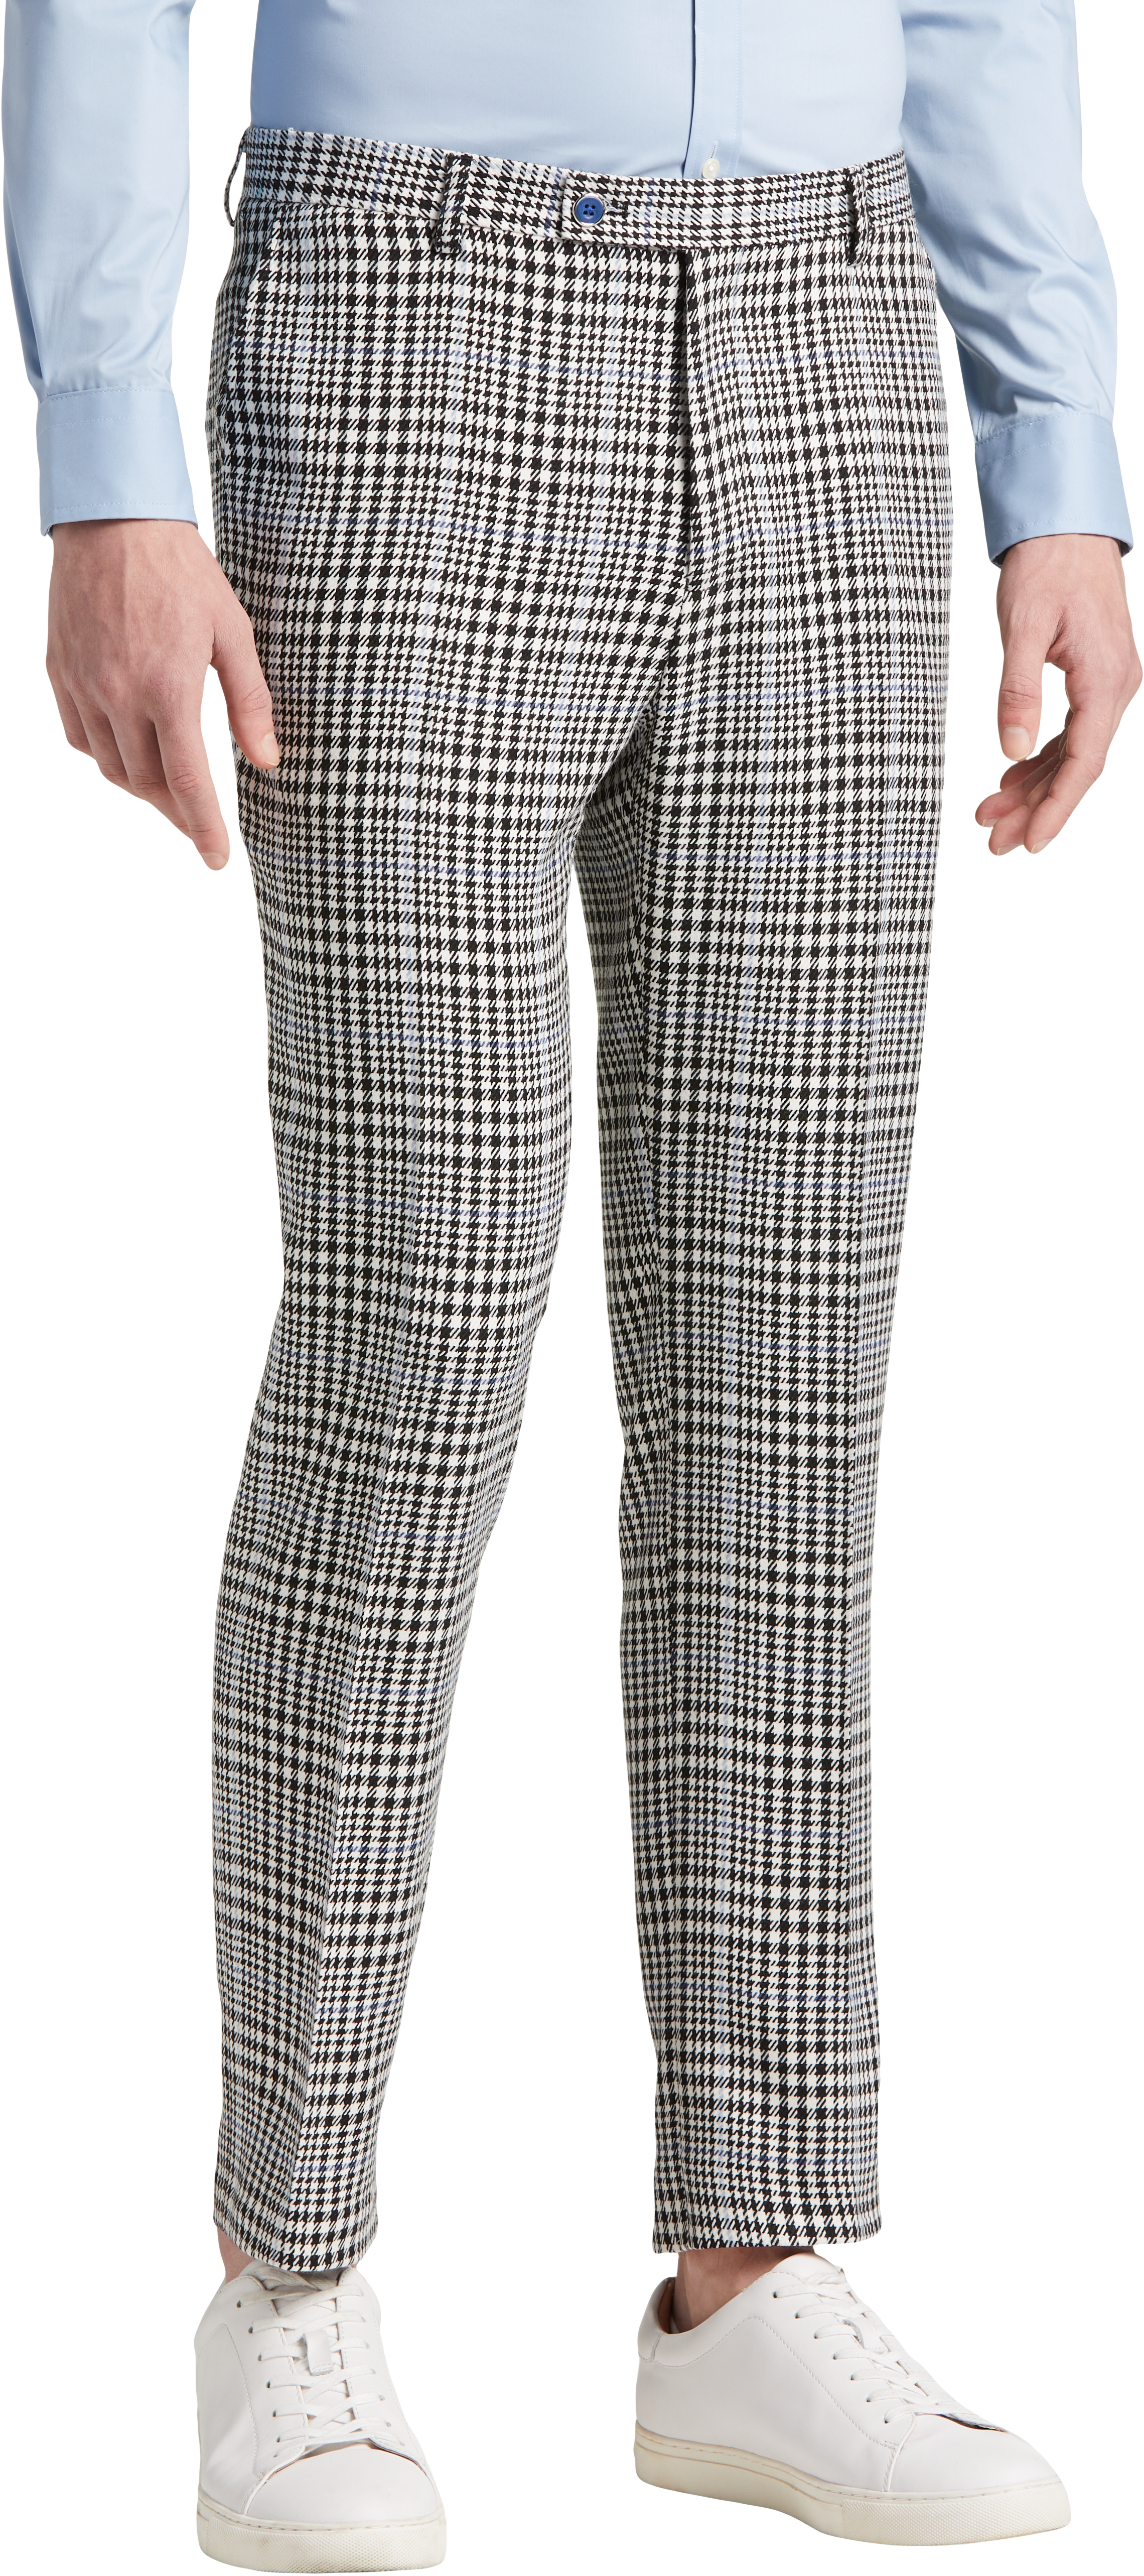 Paisley & Gray Slim Fit Suit Separates Pants, Black and White Houndstooth